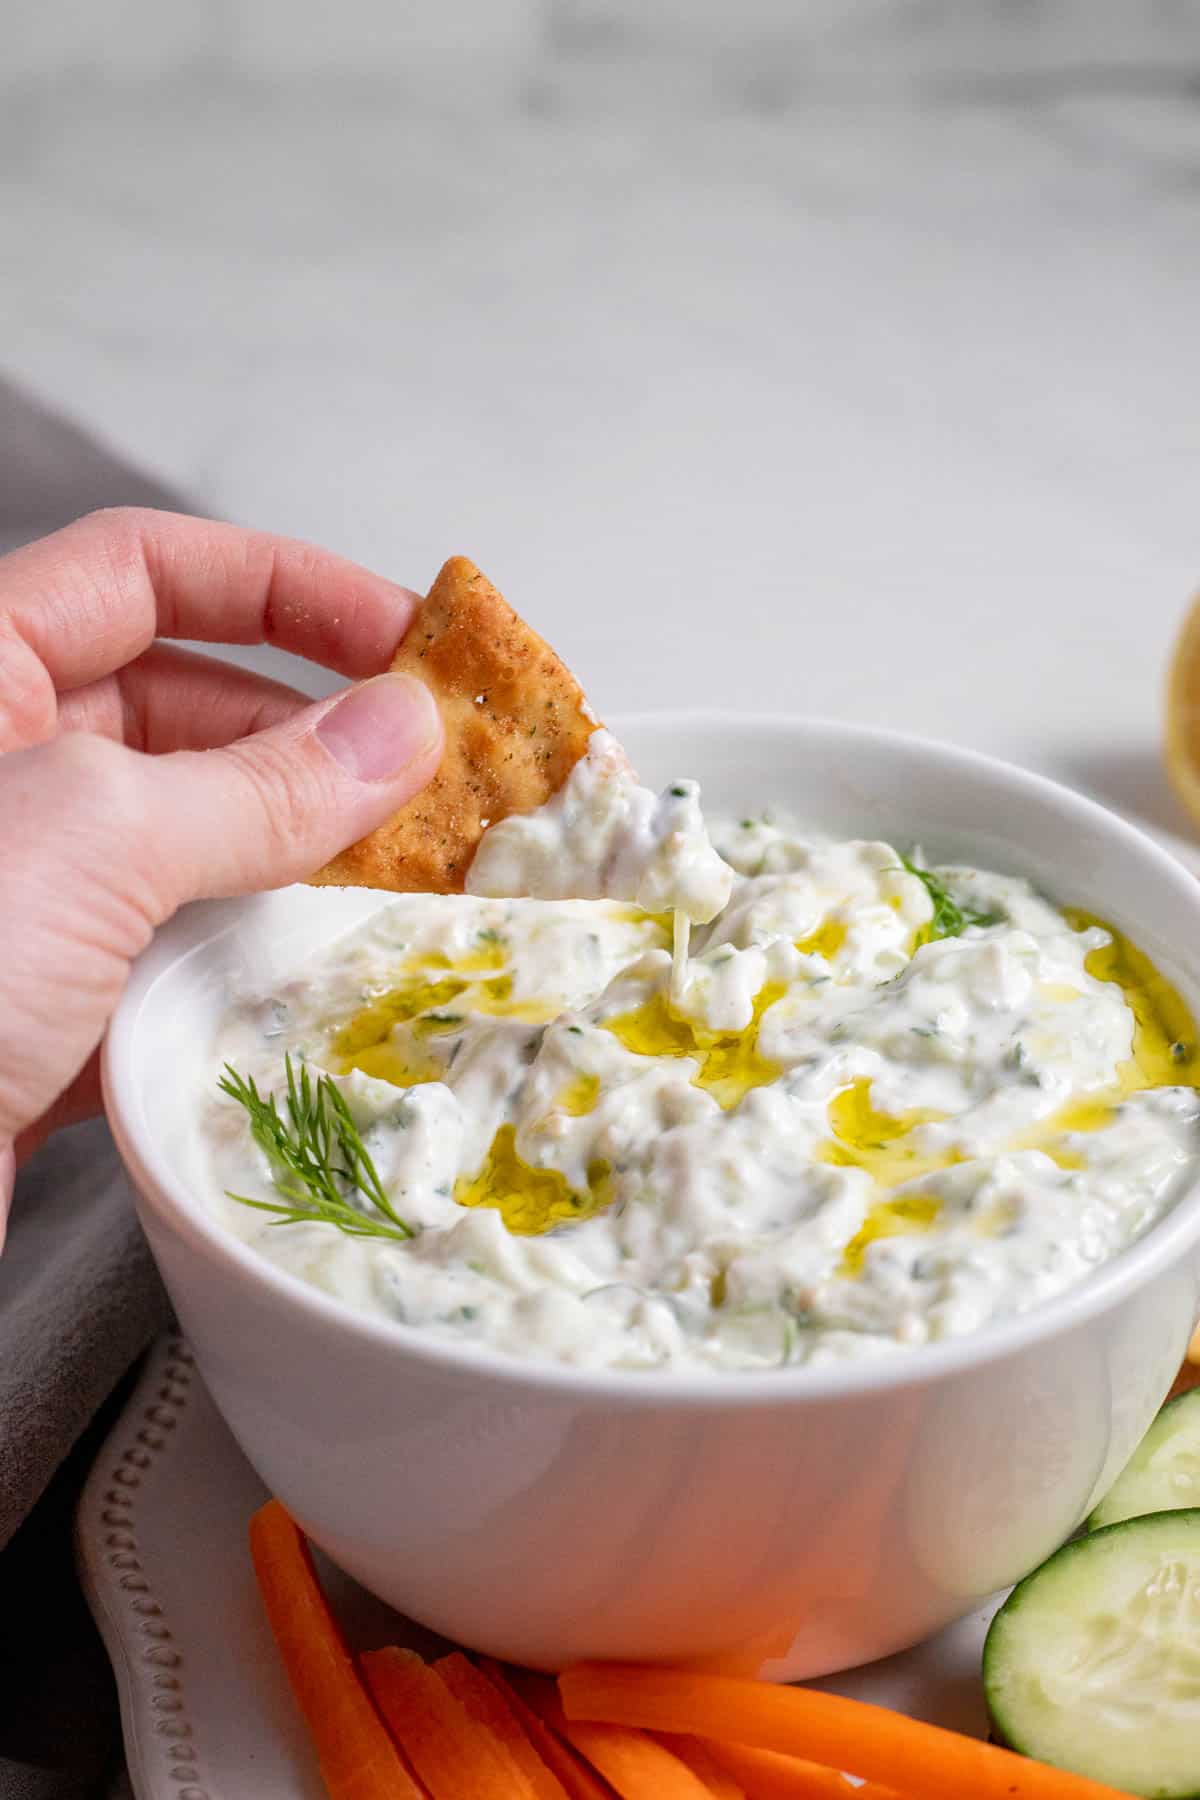 Tzatziki in a white bowl with a hand dipping a cracker into it.